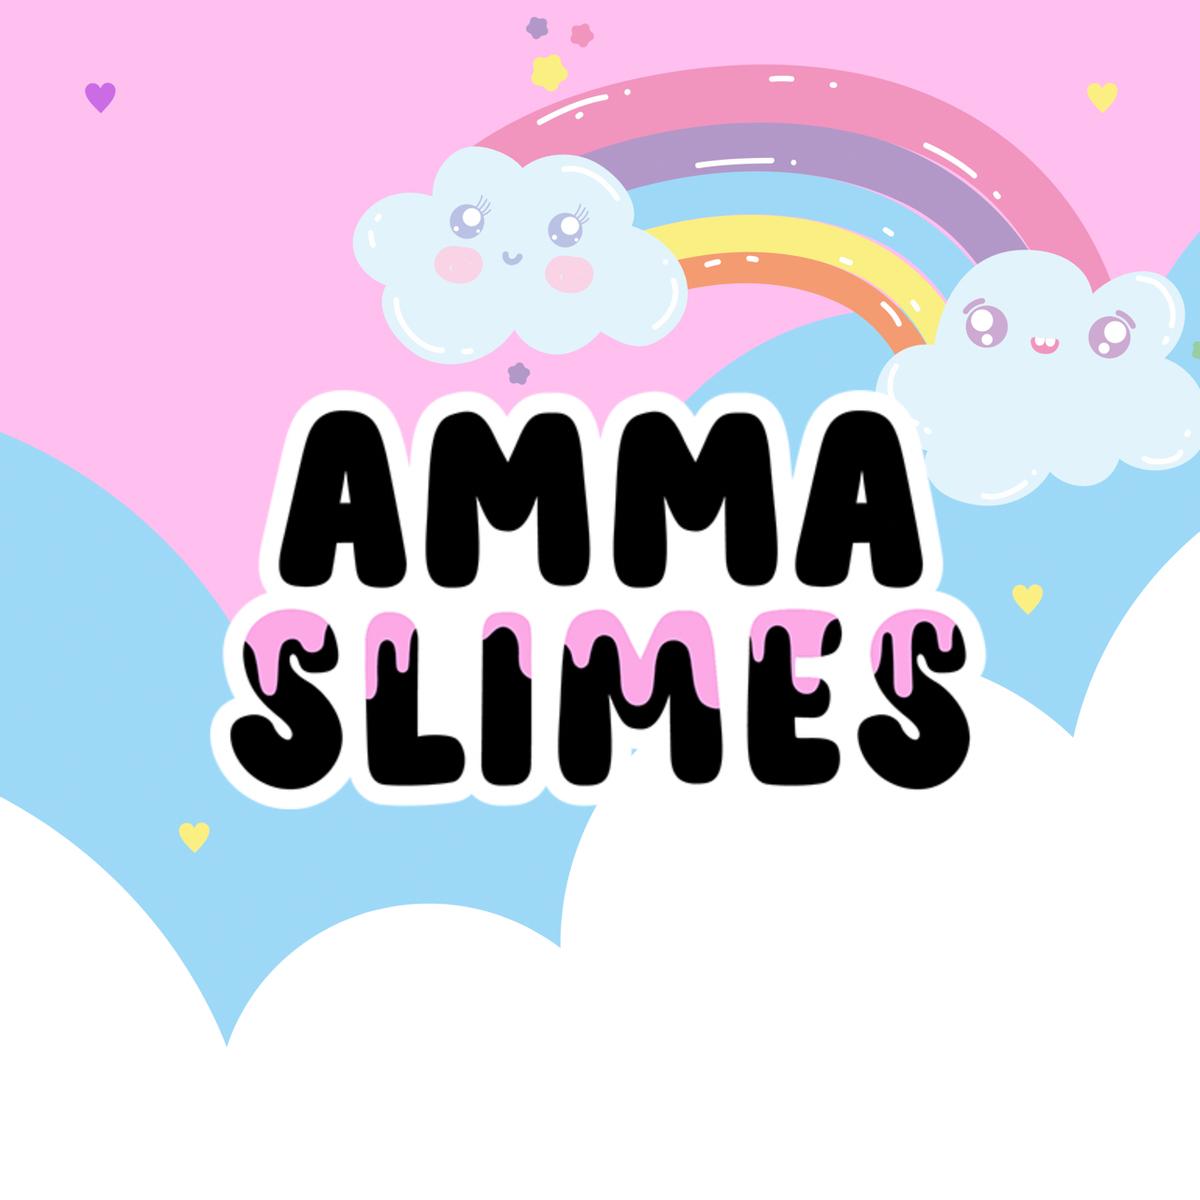 AmmaSlimes's images